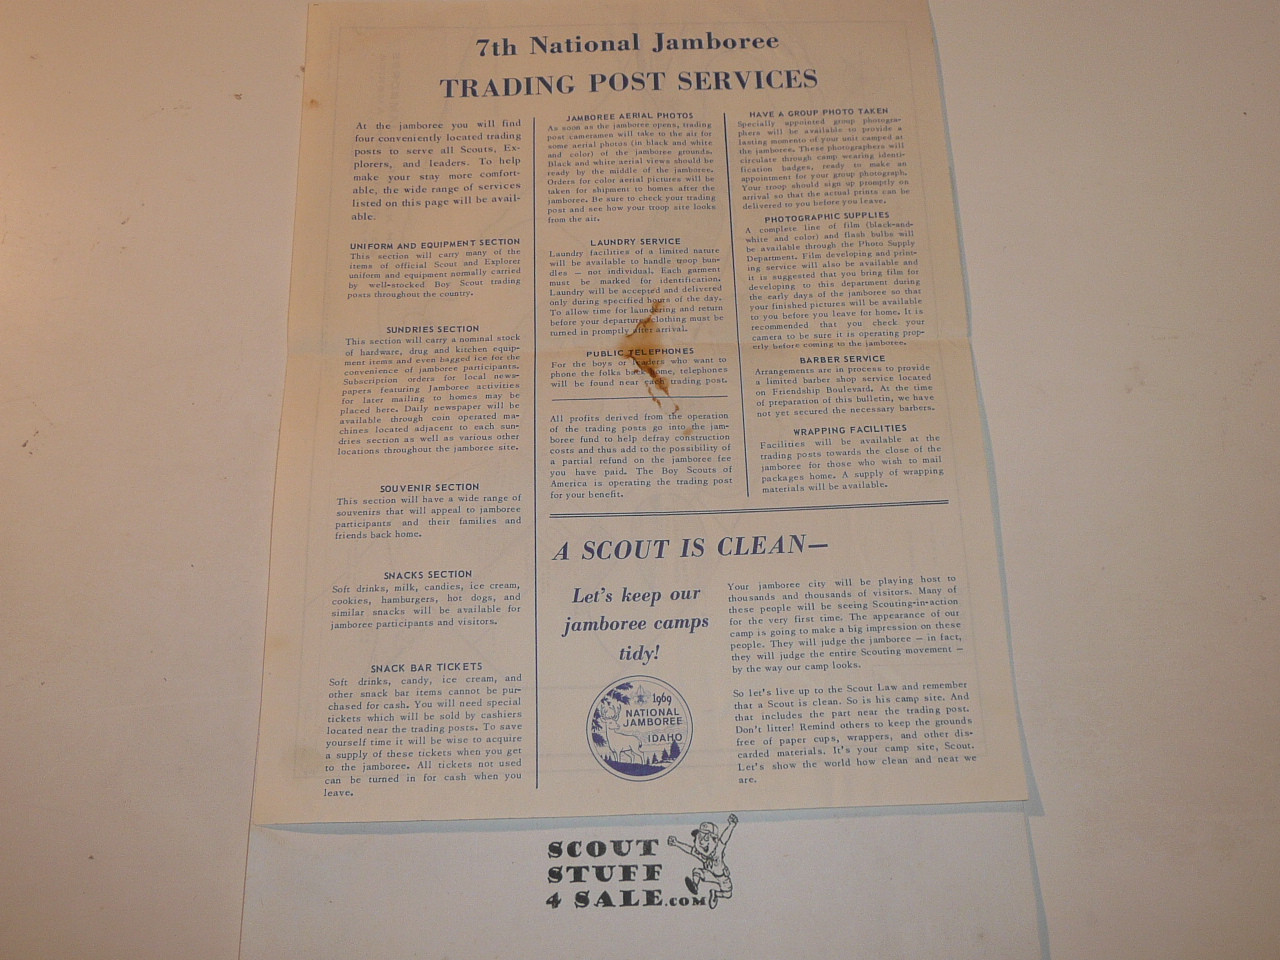 1969 National Jamboree Trading Post Services Information and Map